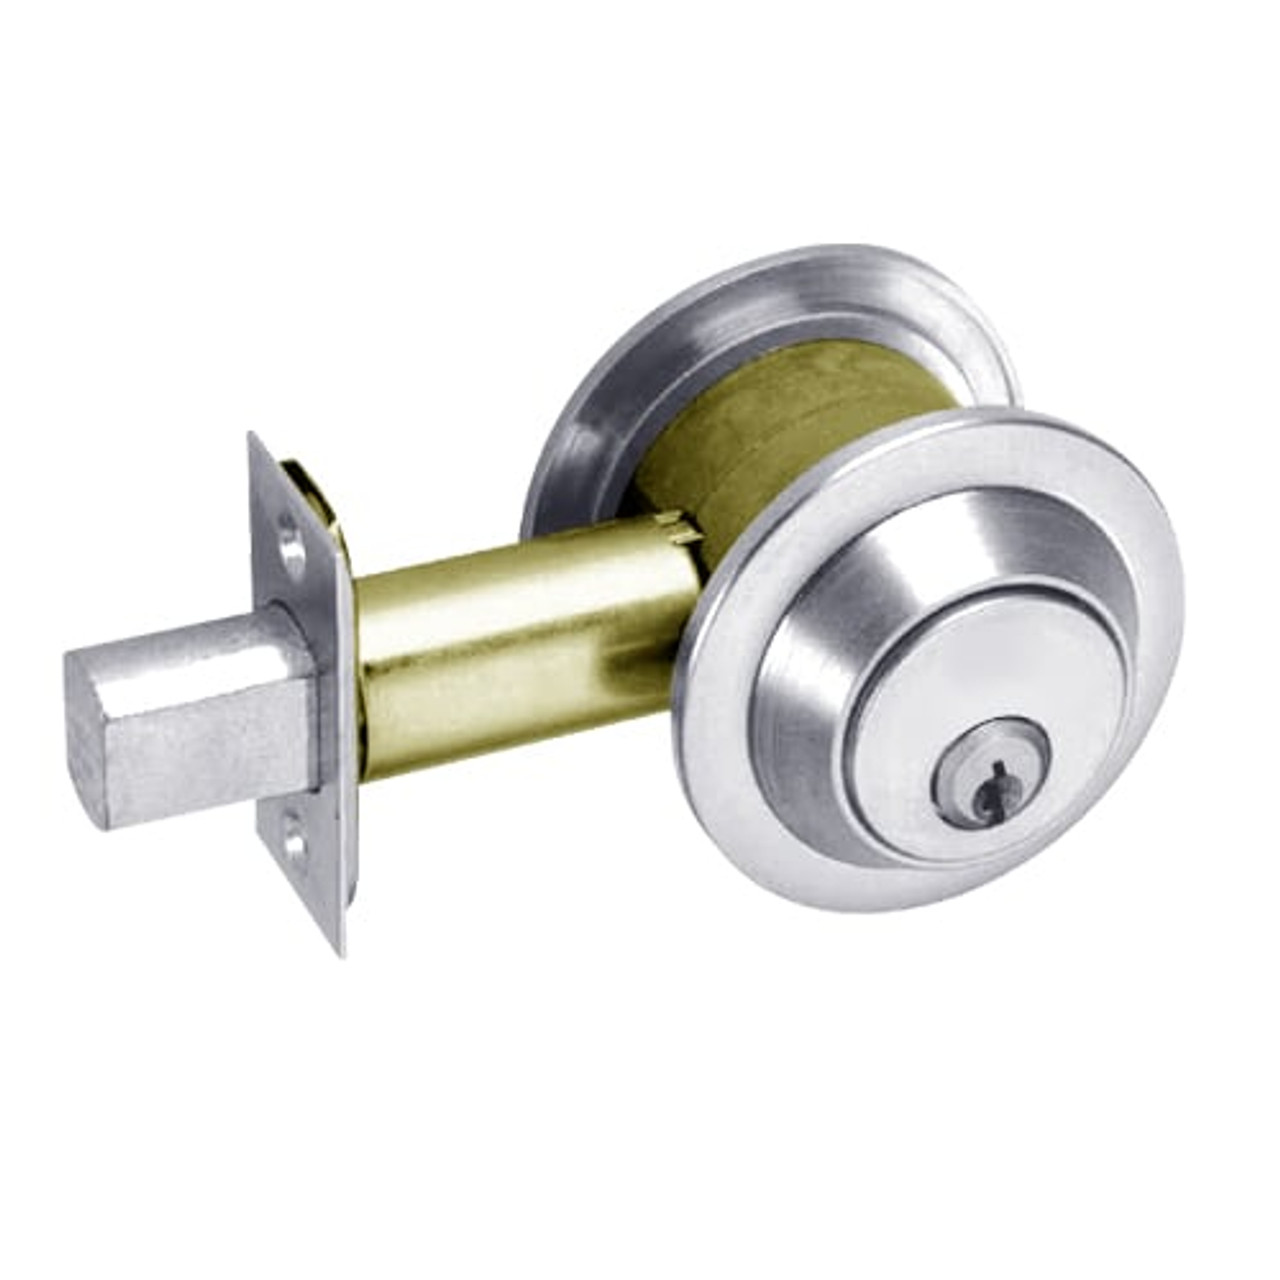 DL3013-625 Corbin DL3000 Series Cylindrical Deadlocks with Single Cylinder in Bright Chrome Finish